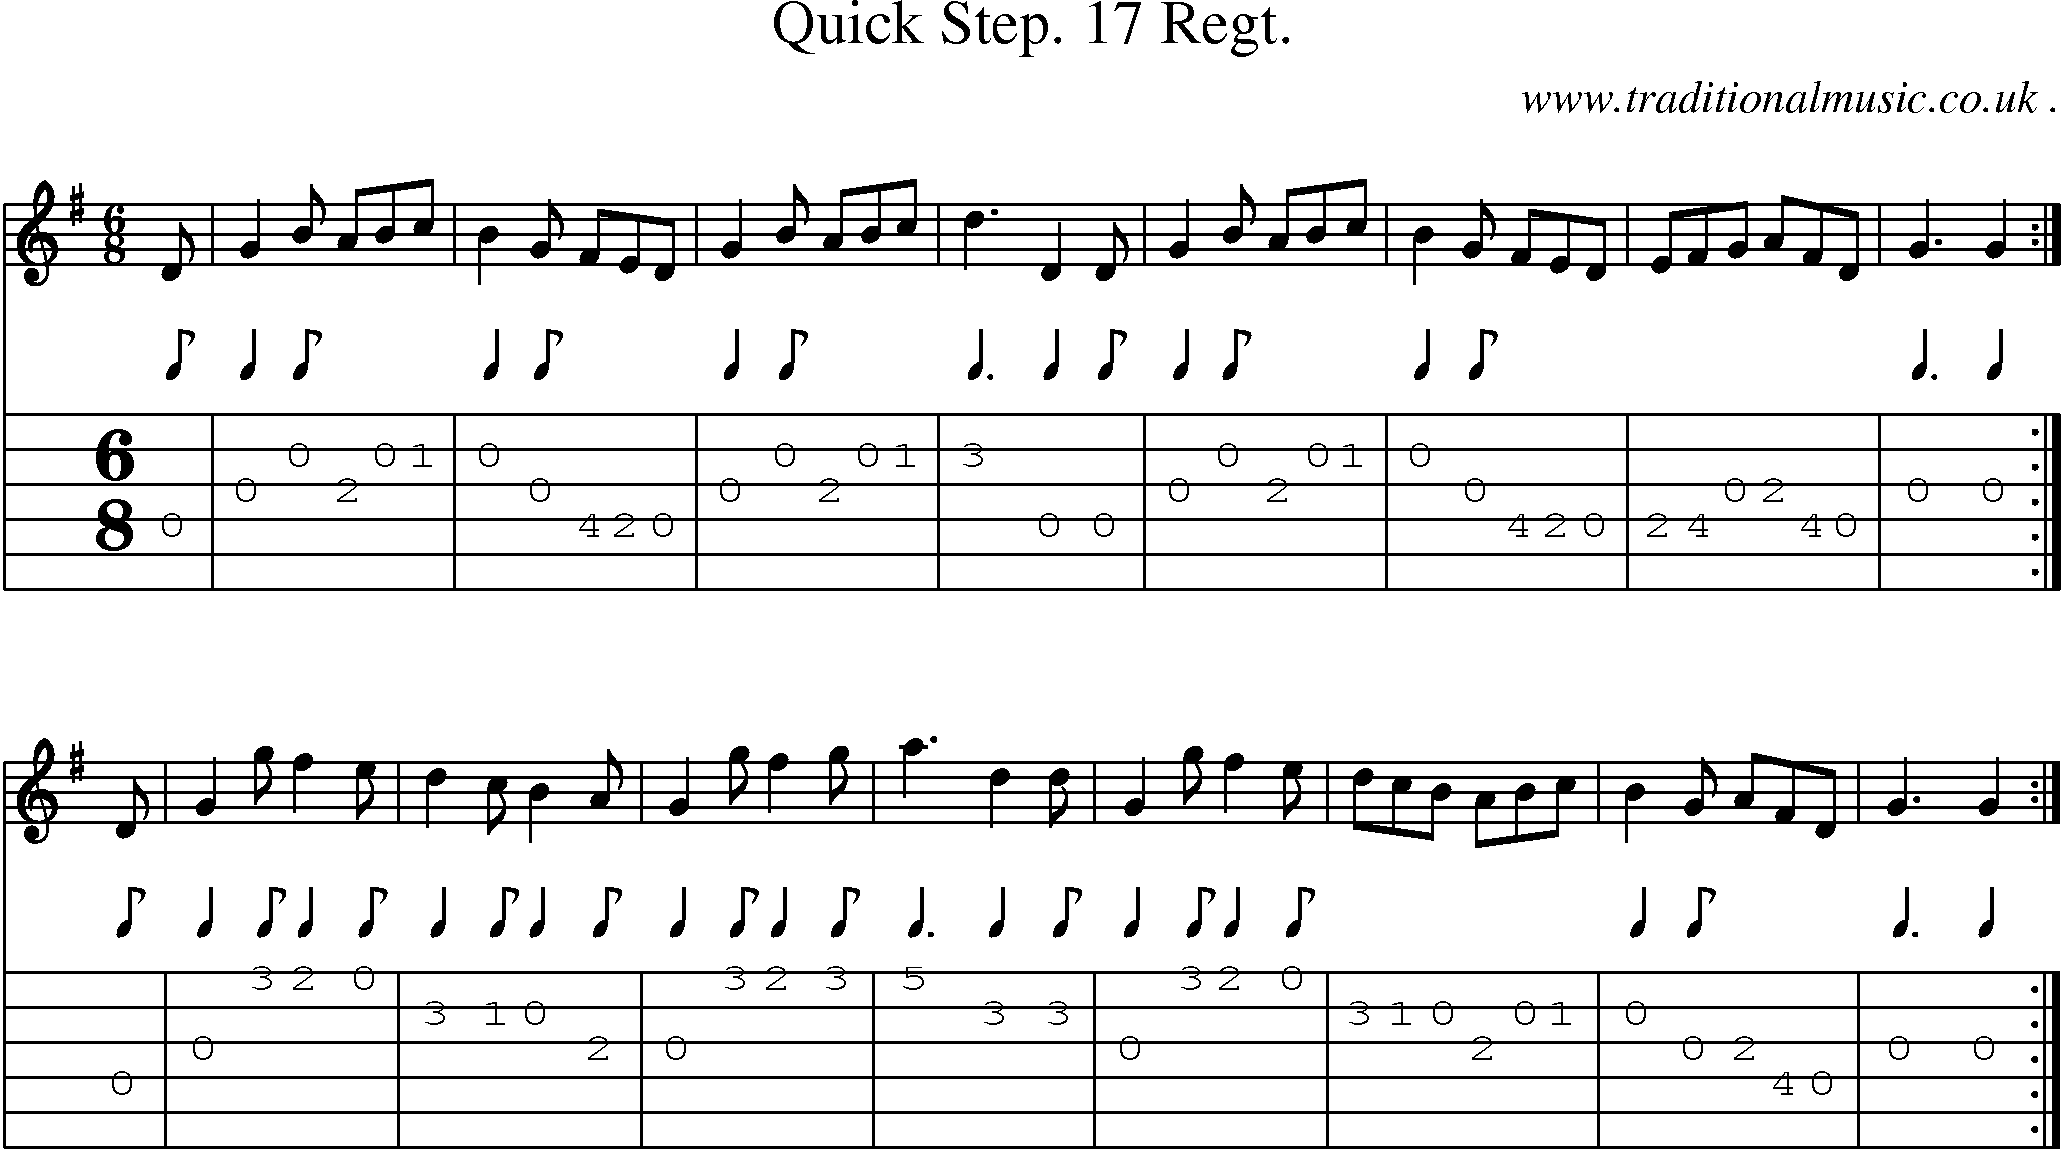 Sheet-music  score, Chords and Guitar Tabs for Quick Step 17 Regt